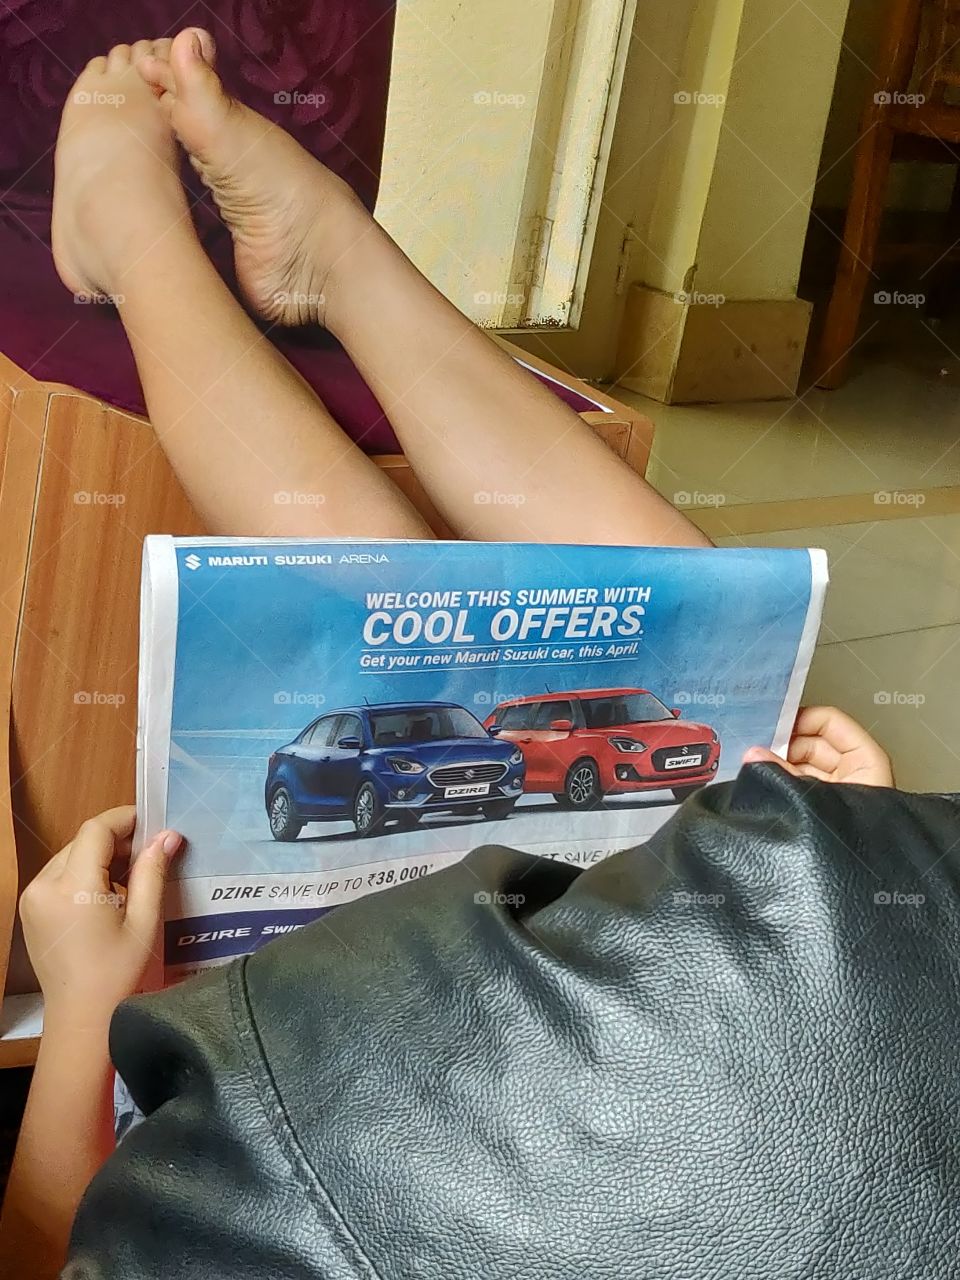 news of the day.. summer offer in buying cars..it's summer time 🙂